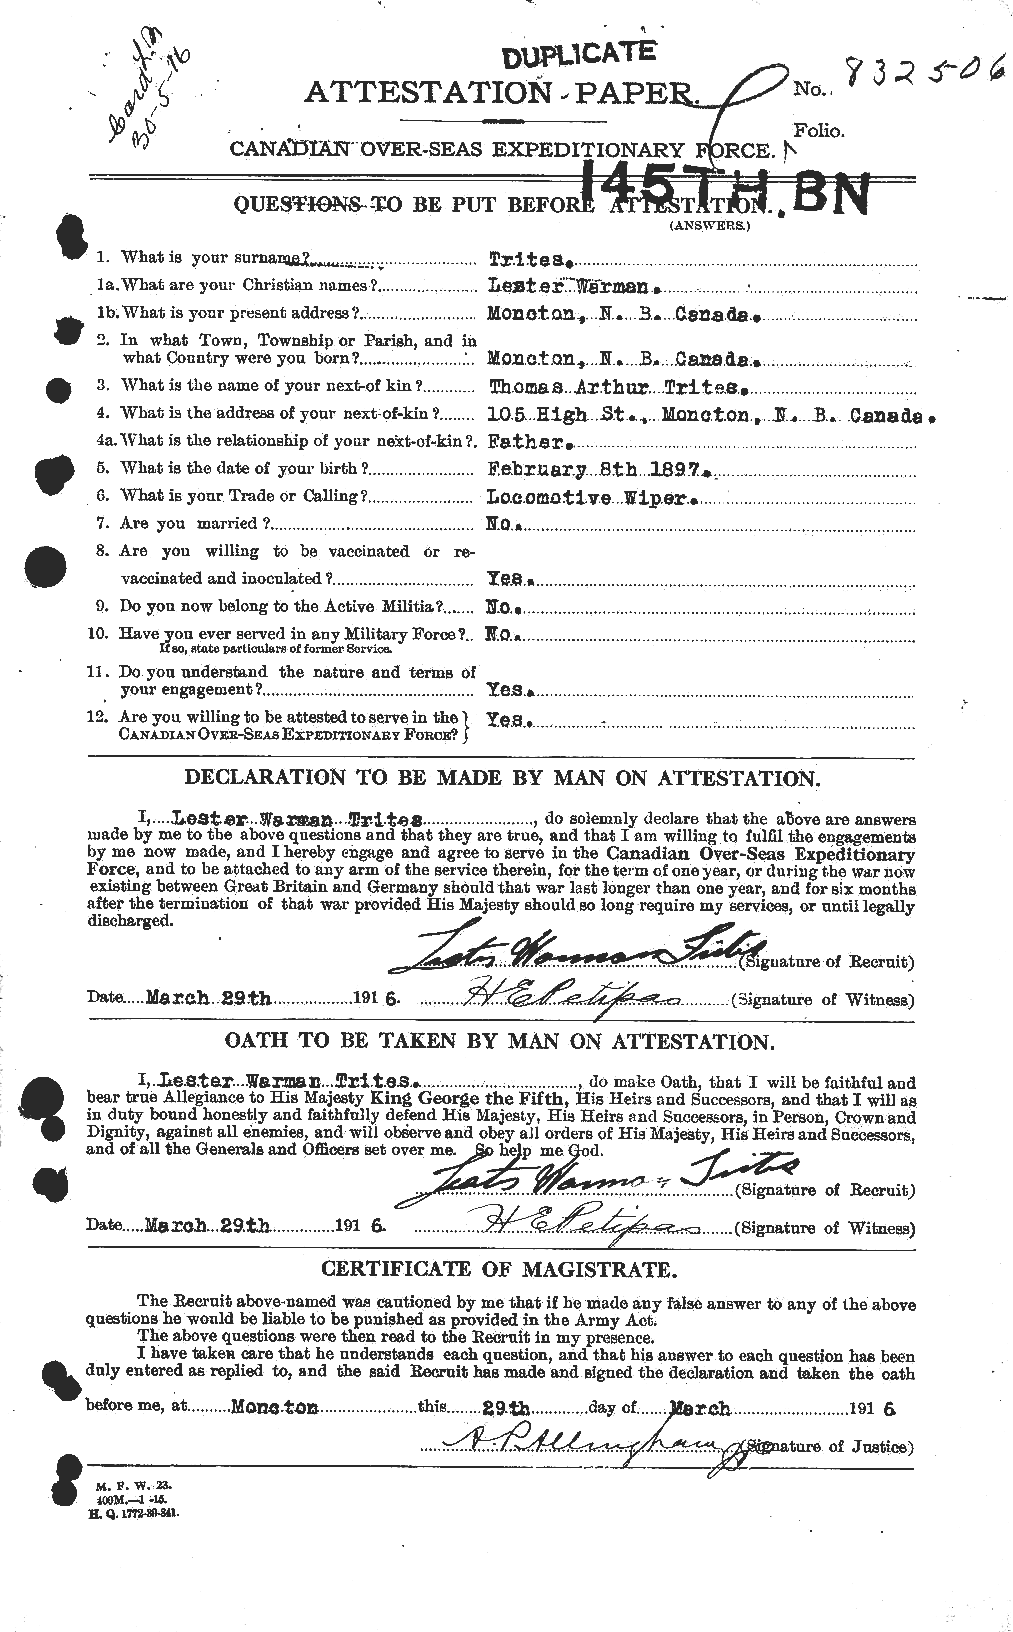 Personnel Records of the First World War - CEF 640155a